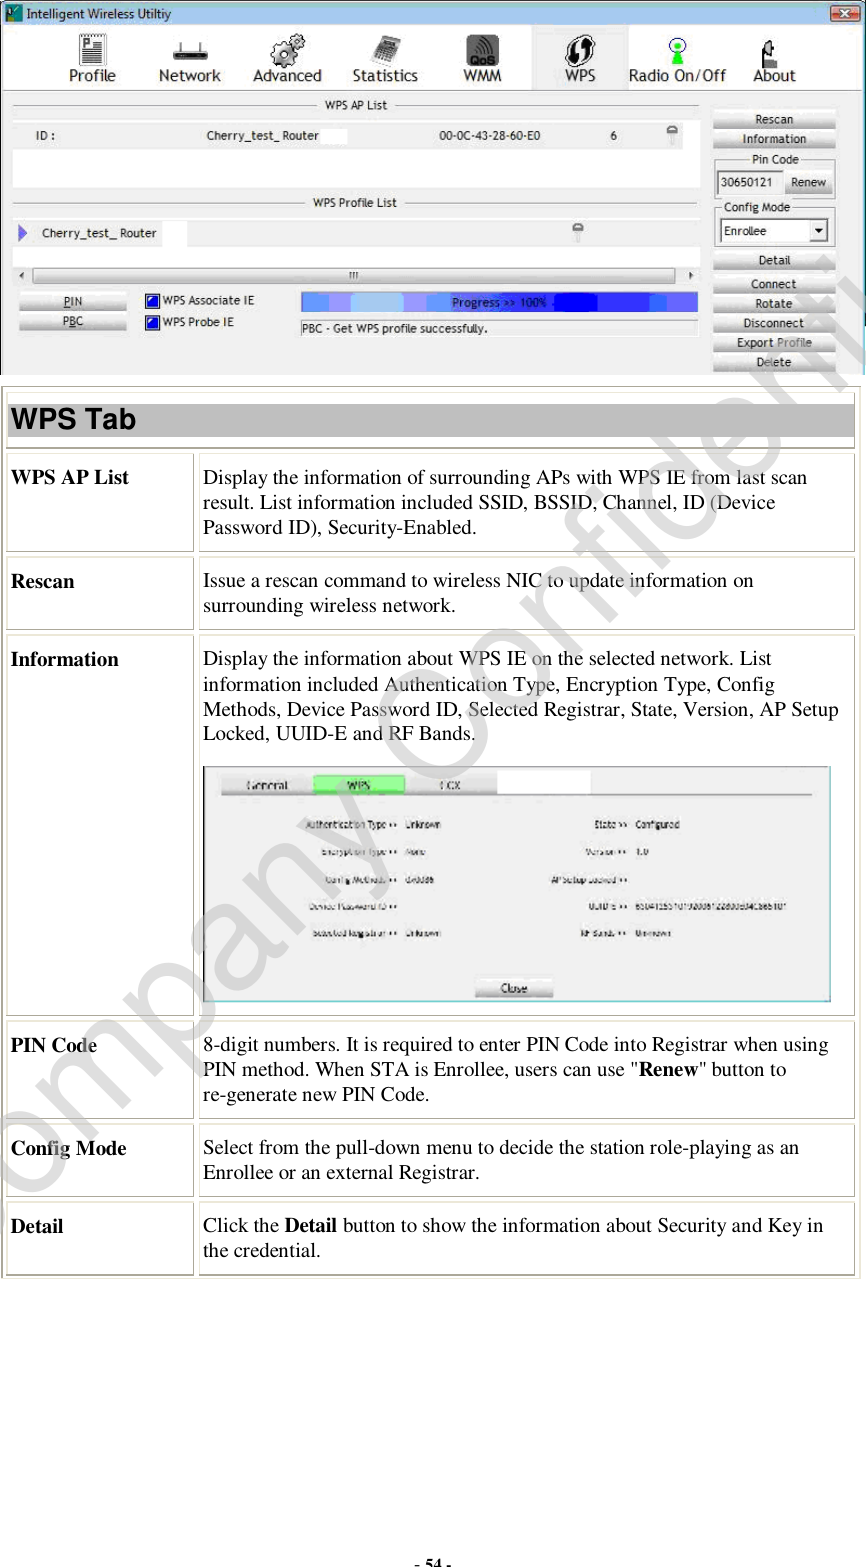  - 54 -  WPS Tab WPS AP List  Display the information of surrounding APs with WPS IE from last scan result. List information included SSID, BSSID, Channel, ID (Device Password ID), Security-Enabled. Rescan  Issue a rescan command to wireless NIC to update information on surrounding wireless network. Information  Display the information about WPS IE on the selected network. List information included Authentication Type, Encryption Type, Config Methods, Device Password ID, Selected Registrar, State, Version, AP Setup Locked, UUID-E and RF Bands.  PIN Code  8-digit numbers. It is required to enter PIN Code into Registrar when using PIN method. When STA is Enrollee, users can use &quot;Renew&quot; button to re-generate new PIN Code. Config Mode  Select from the pull-down menu to decide the station role-playing as an Enrollee or an external Registrar. Detail  Click the Detail button to show the information about Security and Key in the credential. Company Confidential